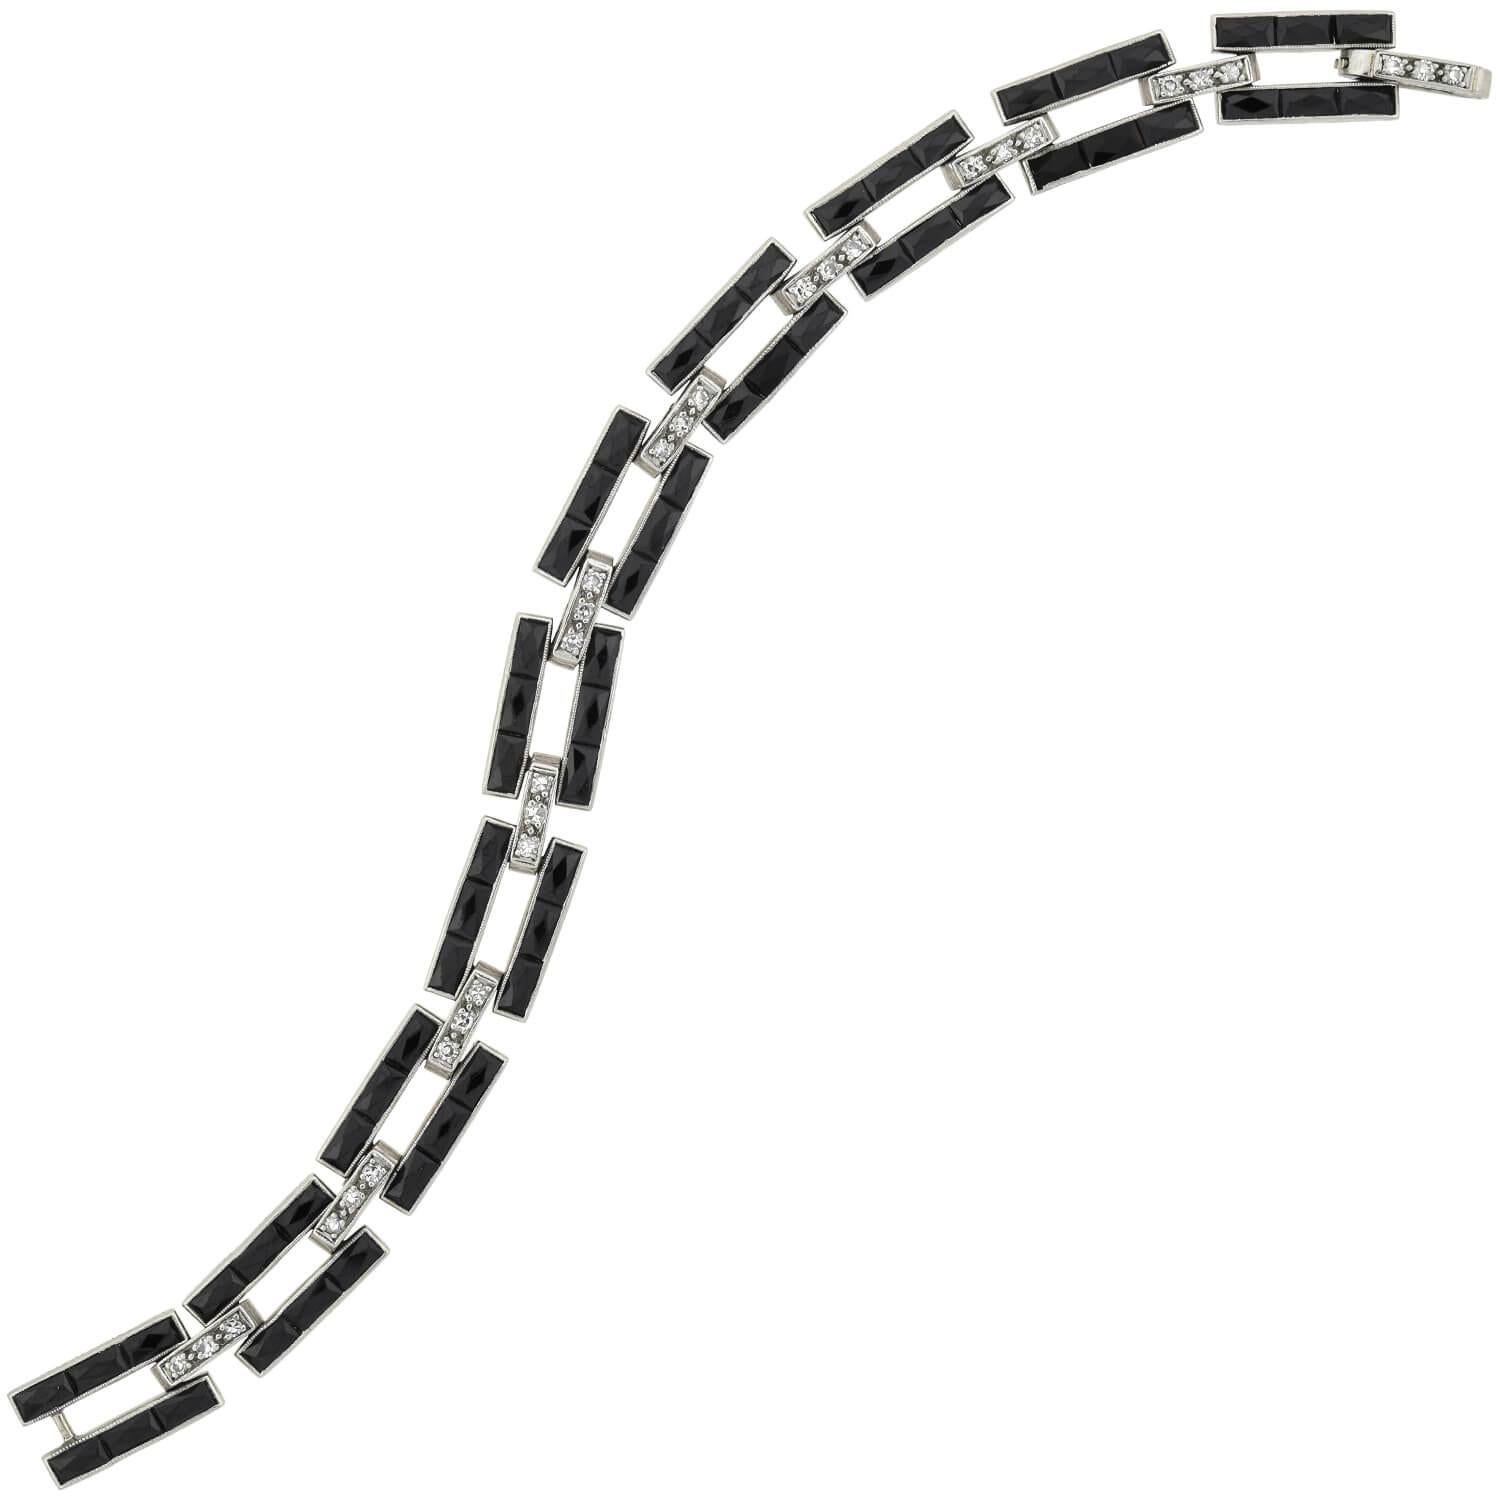 A simply fabulous Art Deco (ca1920s) era onyx and diamond bracelet from legendary American maker J.E. Caldwell & Company. This bold piece is crafted in platinum and features ten open links which come together to form a straight but flexible design.